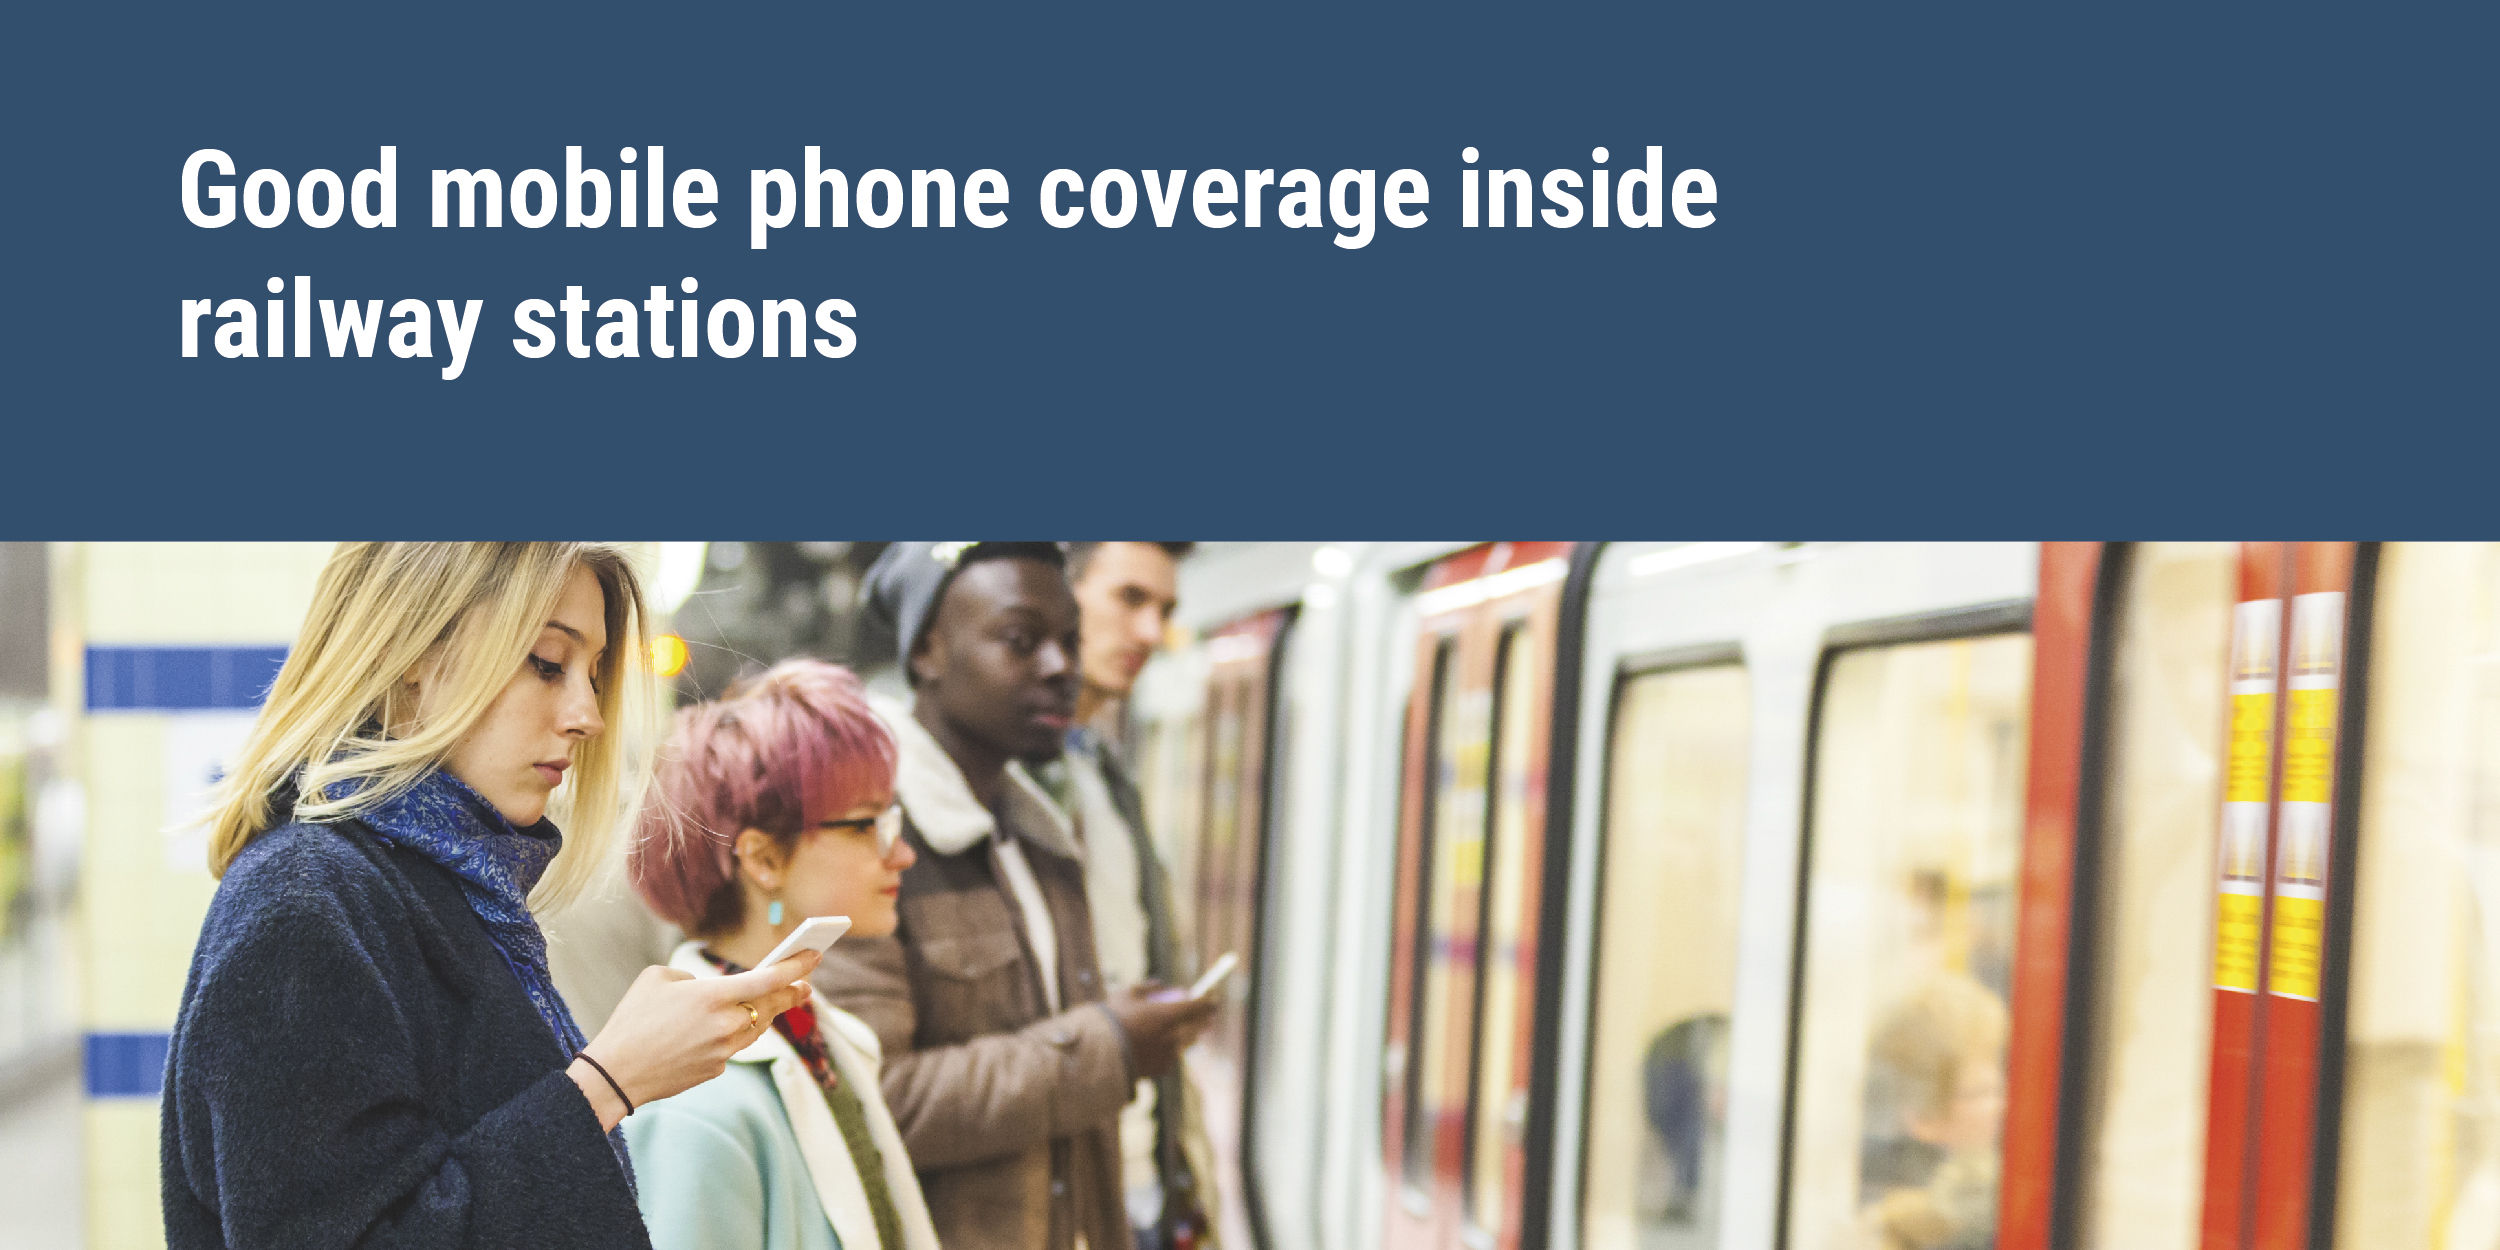 Good mobile phone coverage at railway stations. No mobile signal coverage